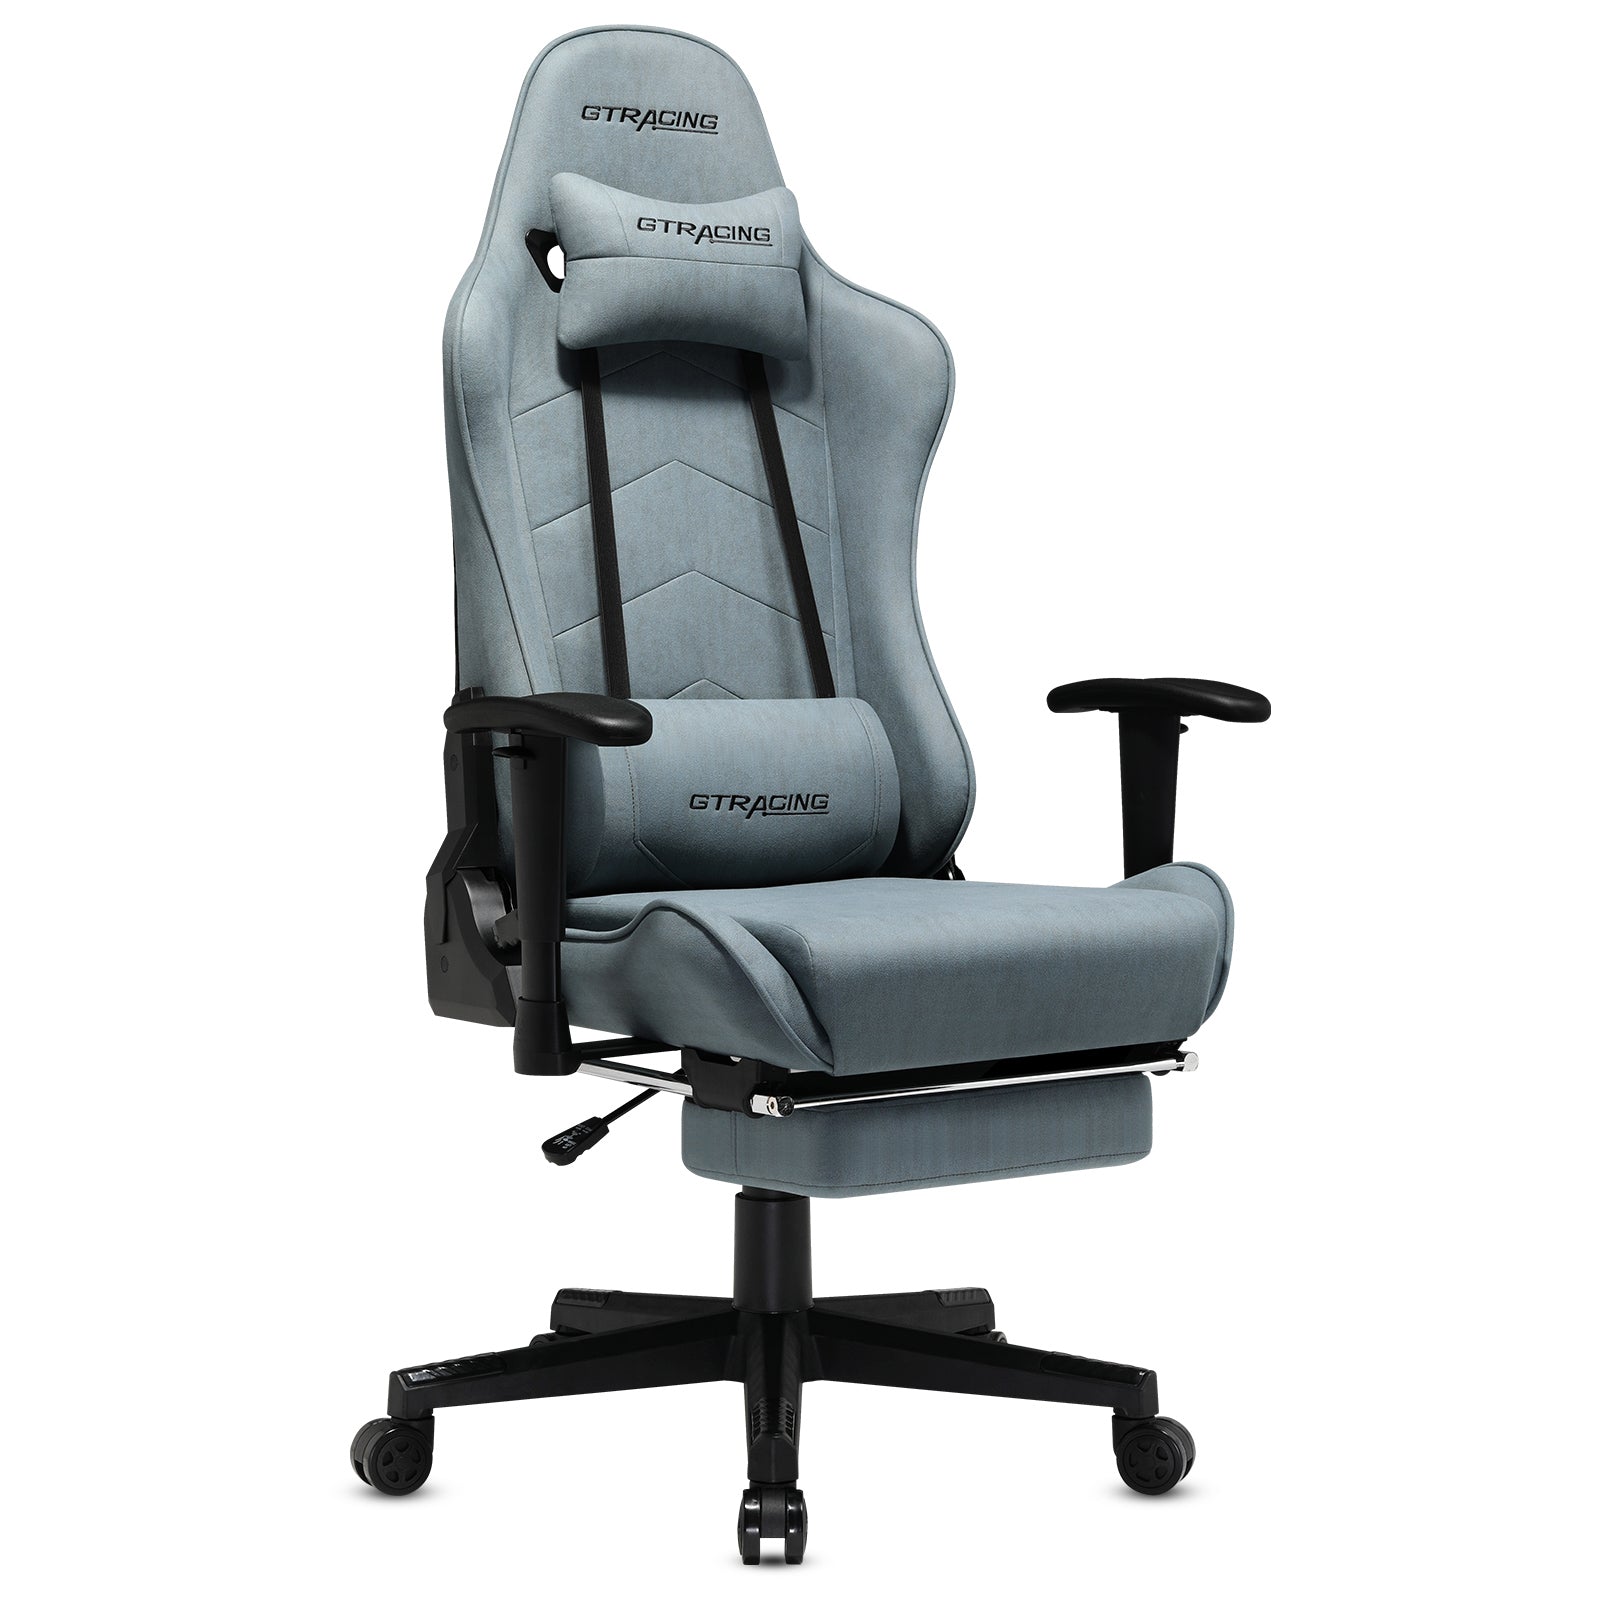 Footrest Series GT901 | GTRacing Gaming Chair